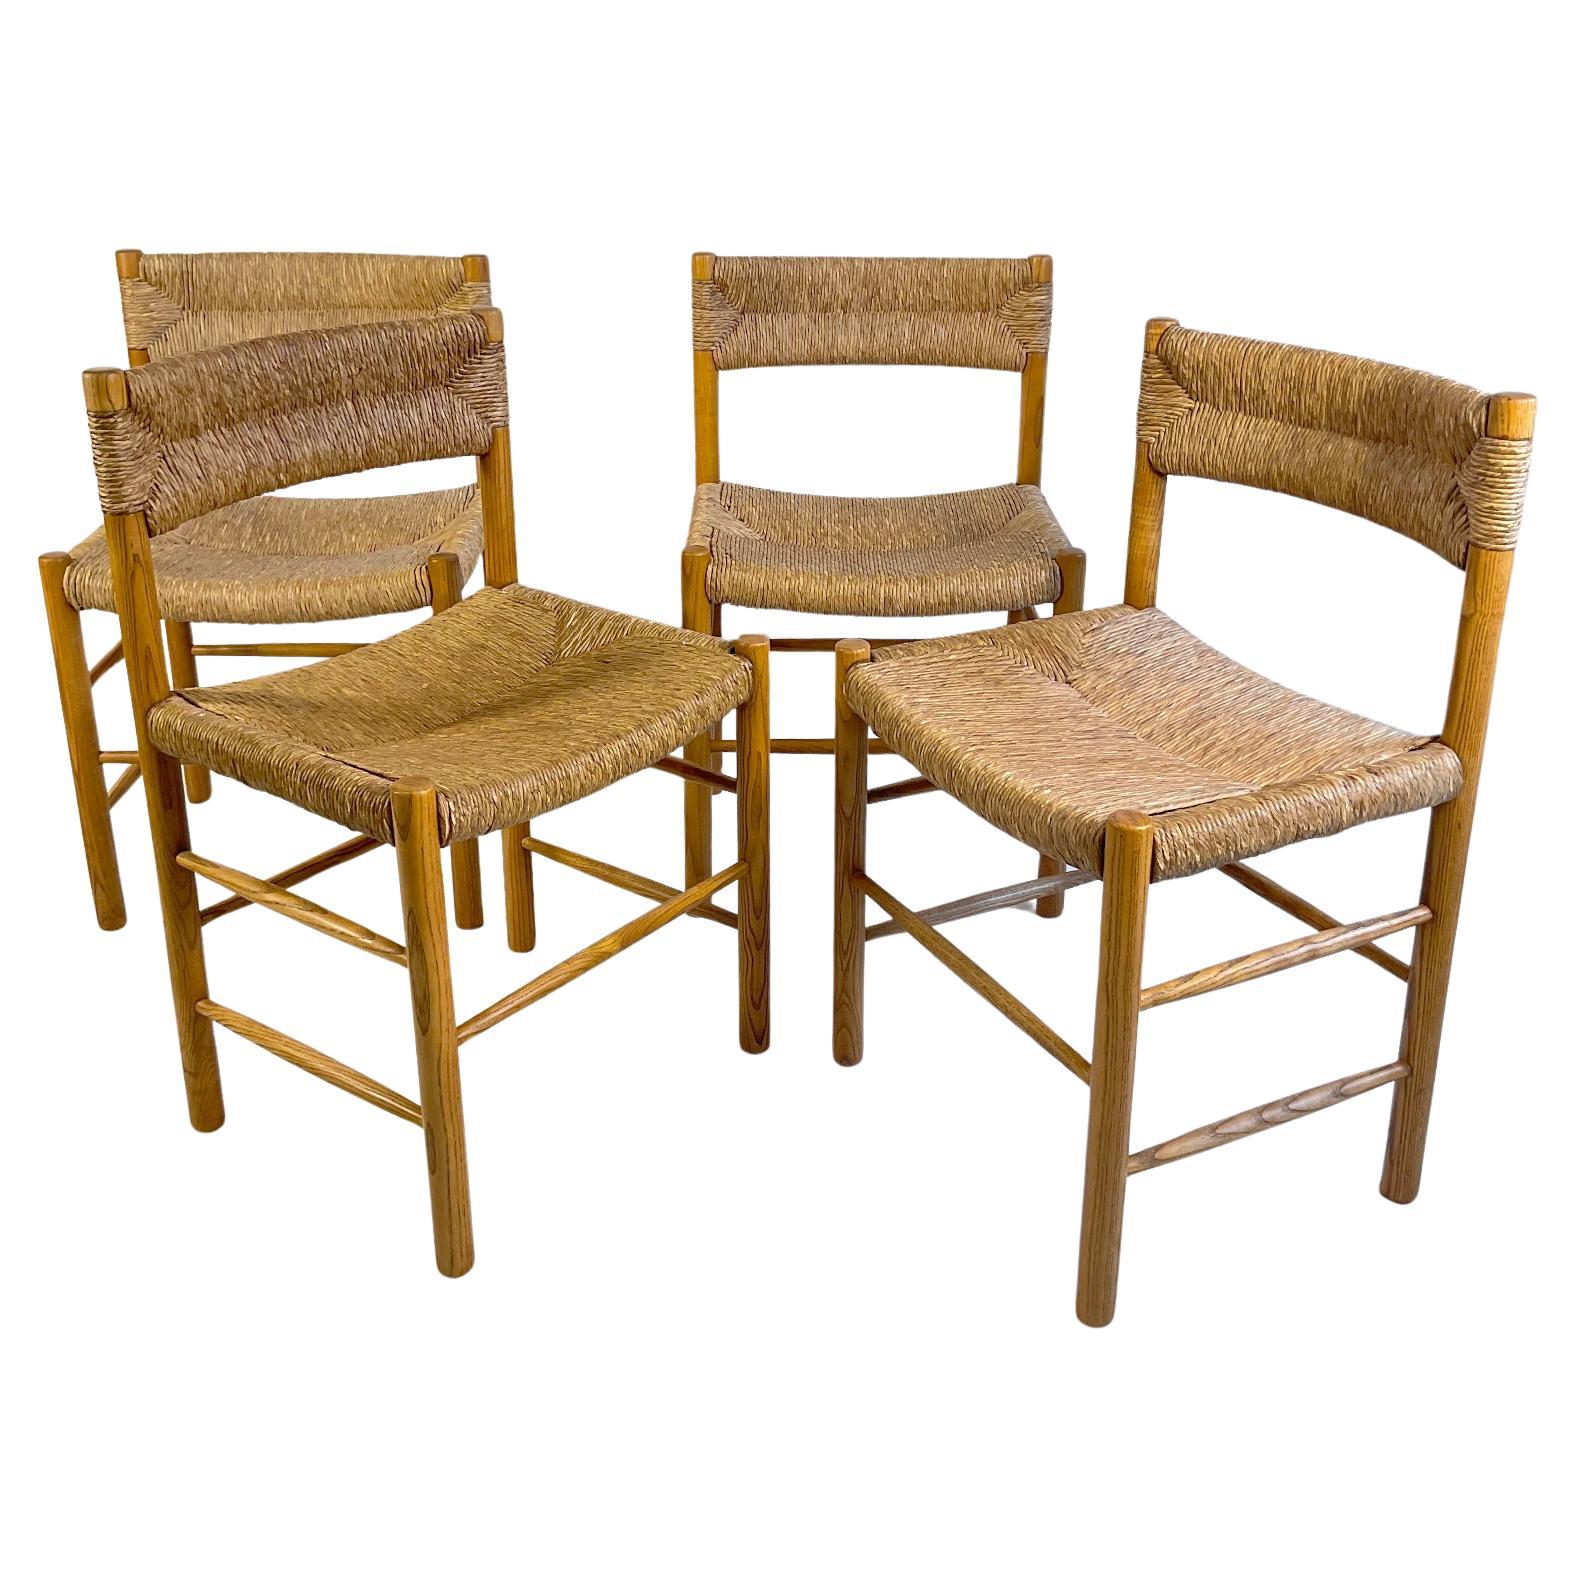 Set of Four Dordogne Chairs by Robert Sentou for Charlotte Perriand France 1960s